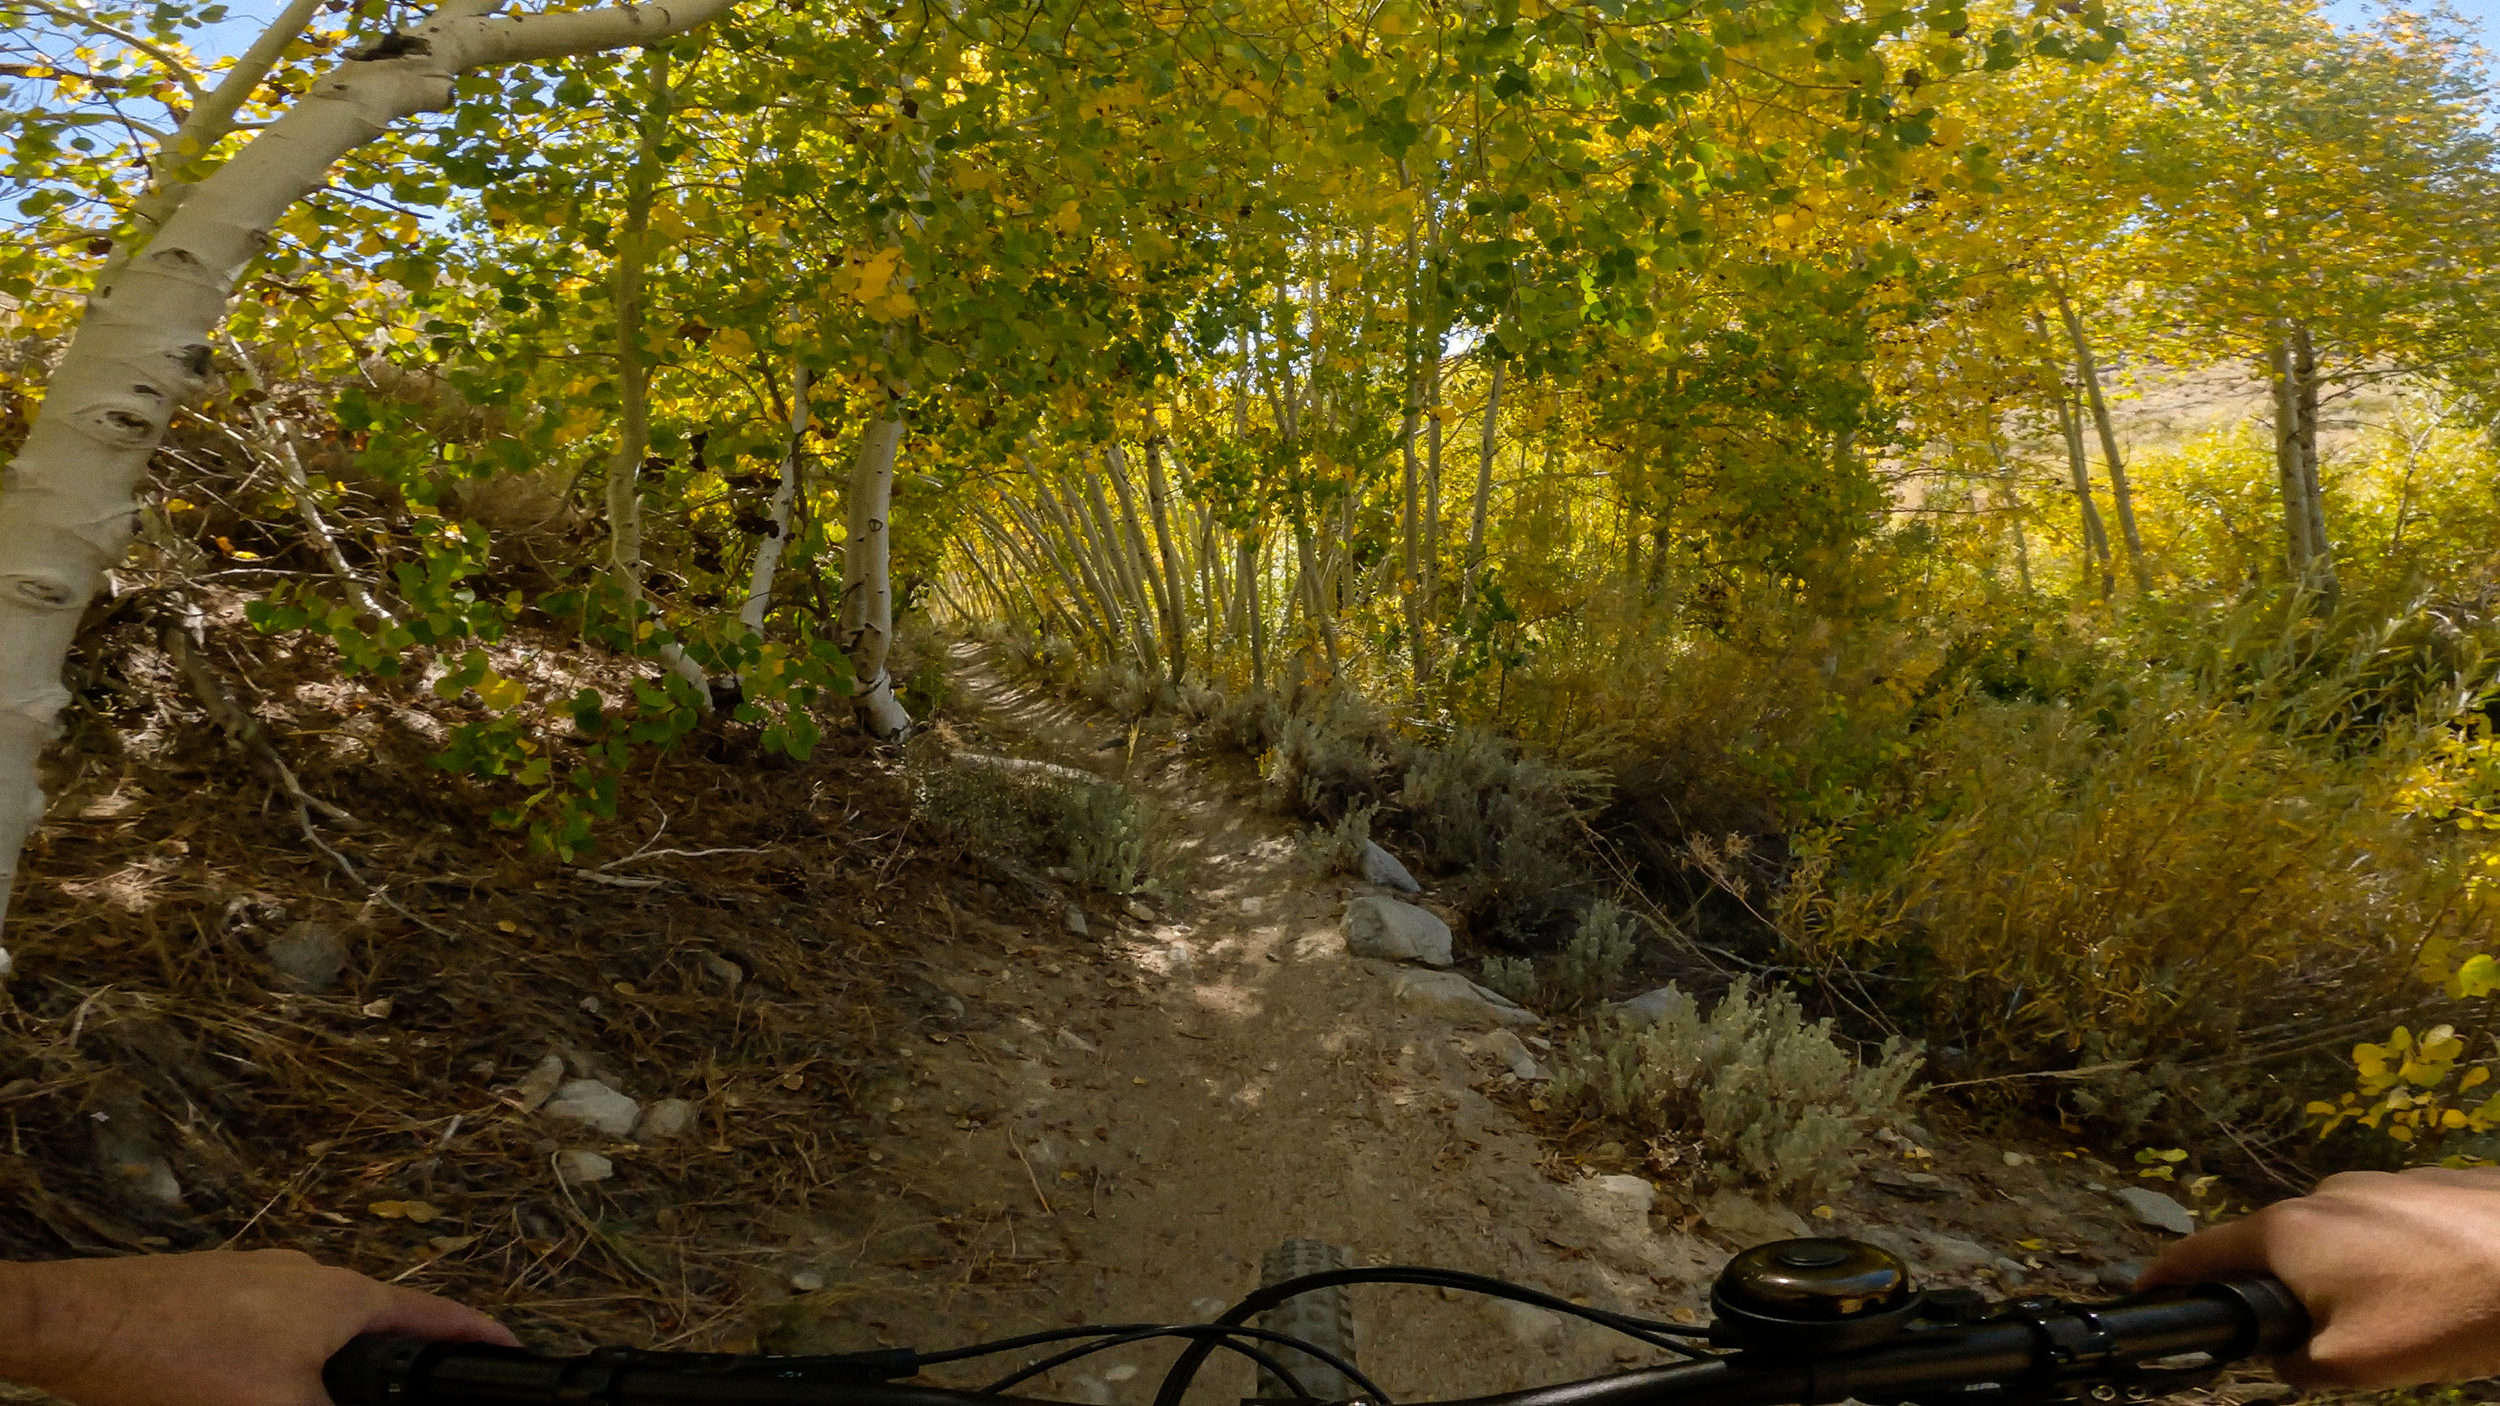 Riding through the Fall Colors on Lower Rock Creek